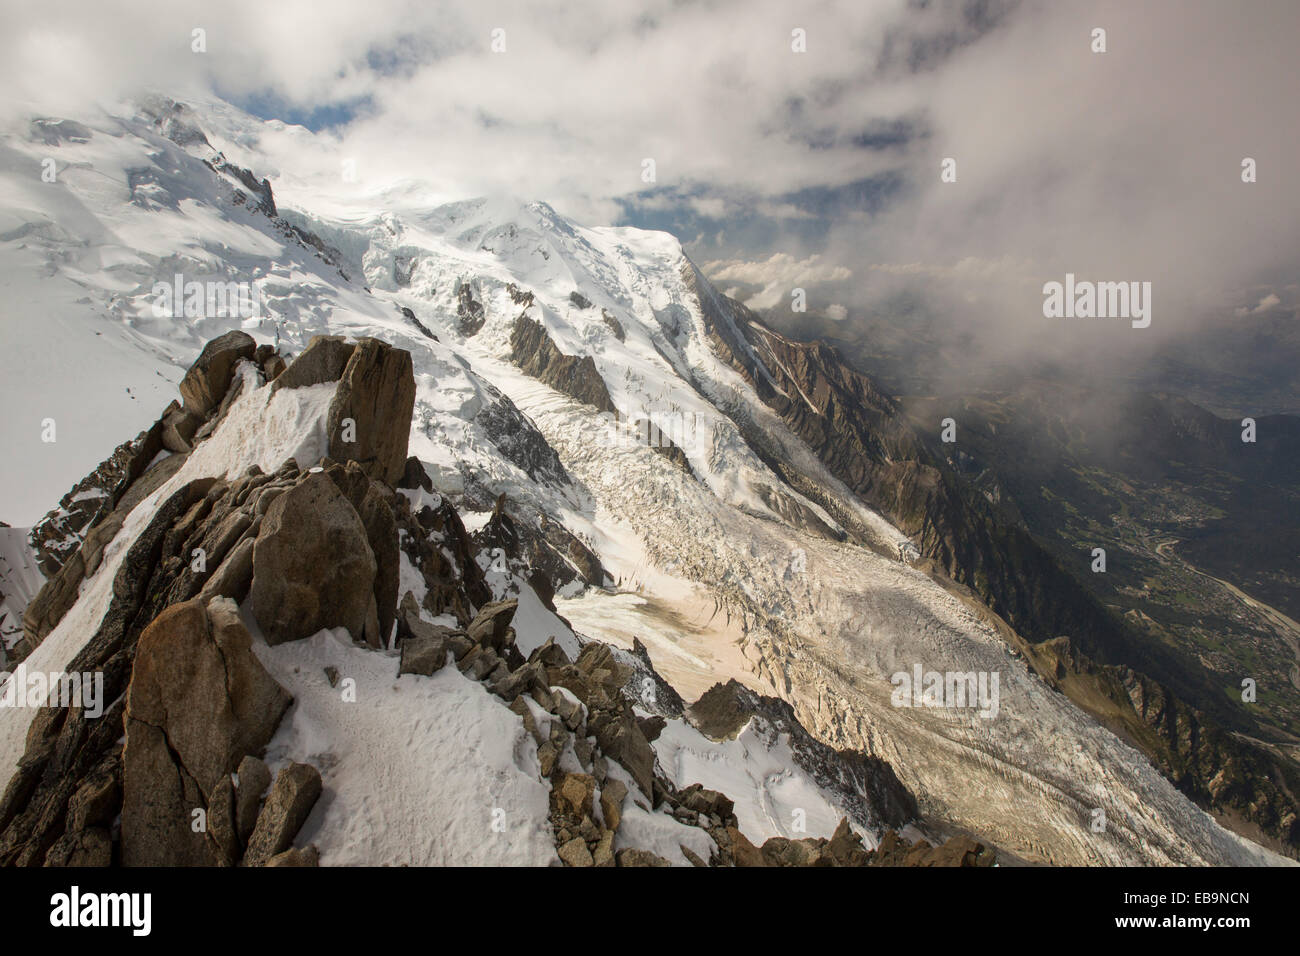 Mont Blanc from the Aiguille Du Midi above Chamonix, France. Stock Photo